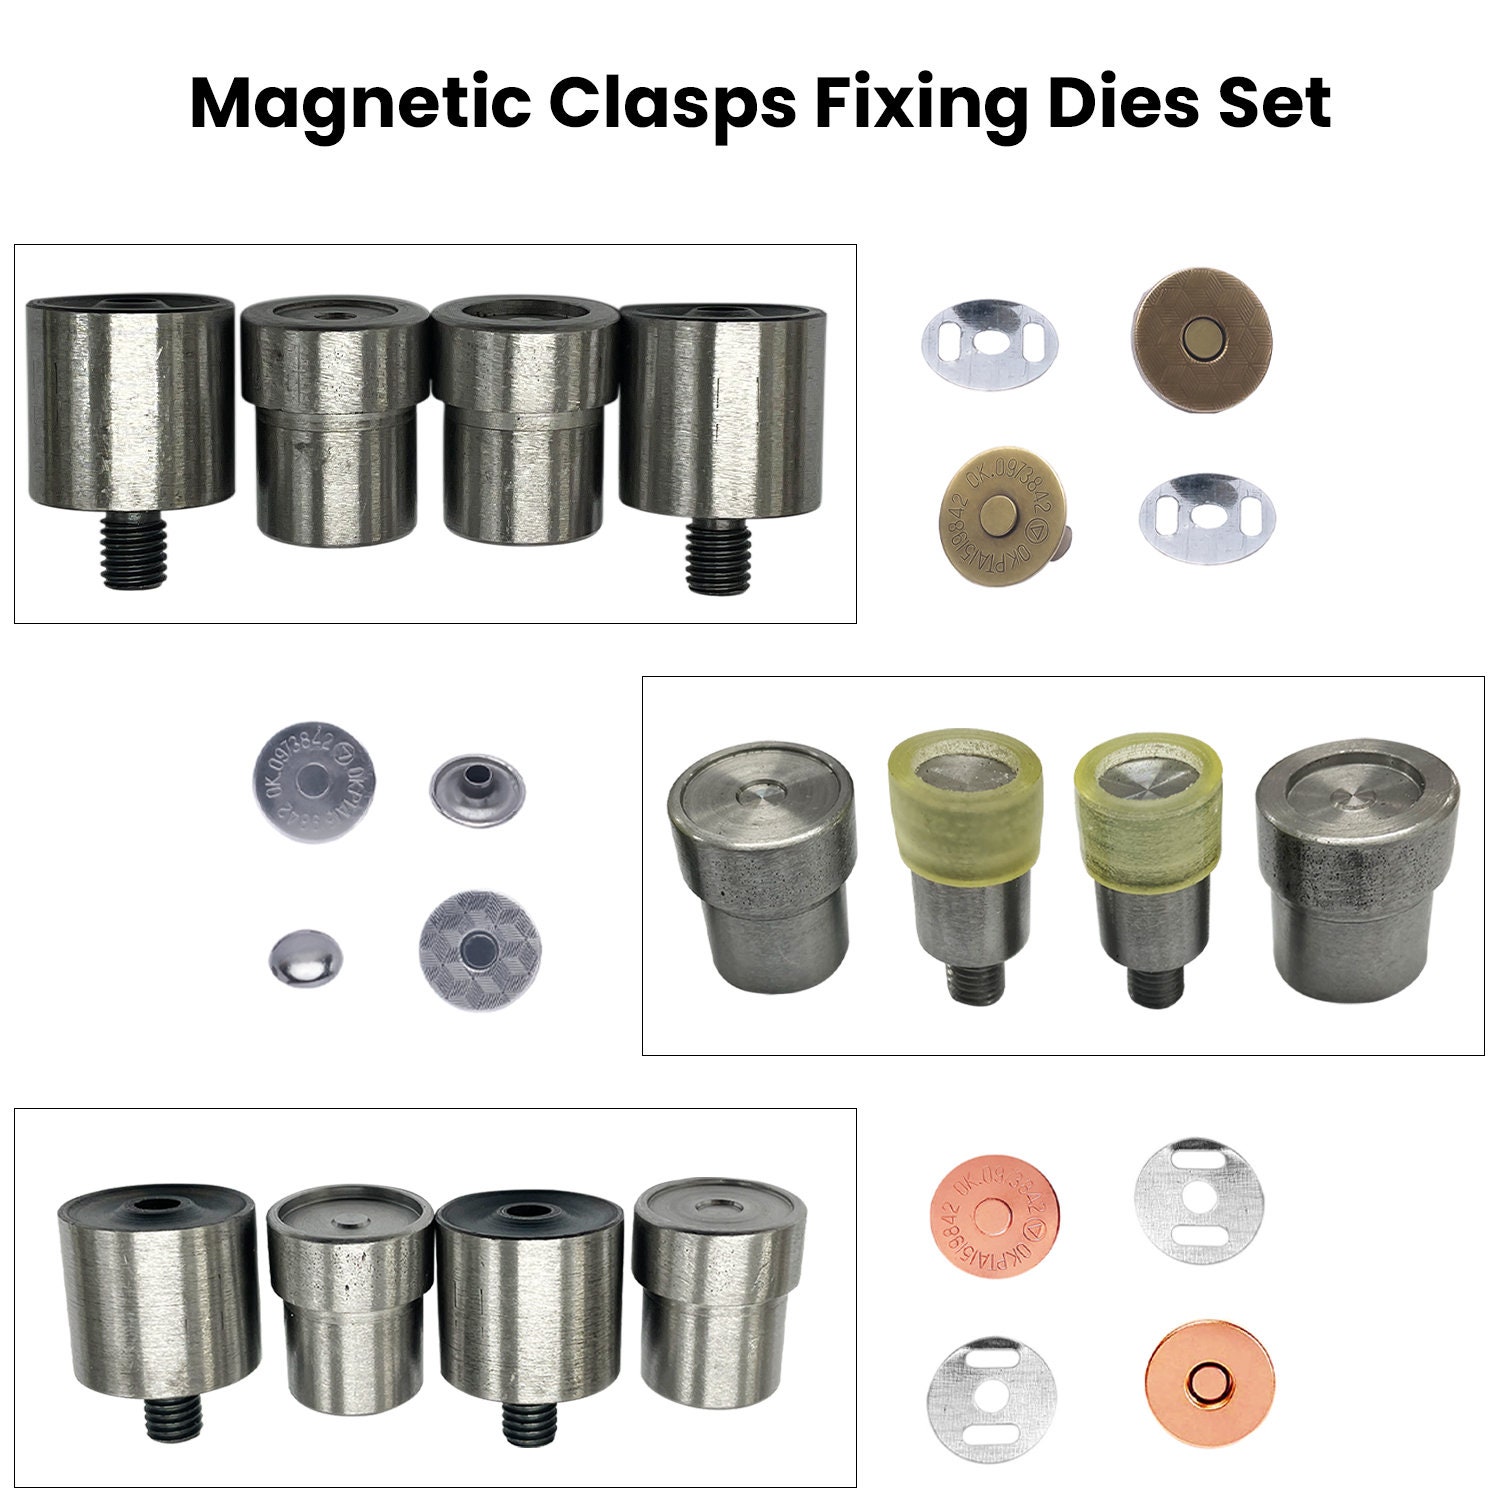 4PCs Snap Buttons Dies Mould Set, Wrap Button Kit Stainless Steel Button  Die Hand Snap Pressing Mach…See more 4PCs Snap Buttons Dies Mould Set, Wrap